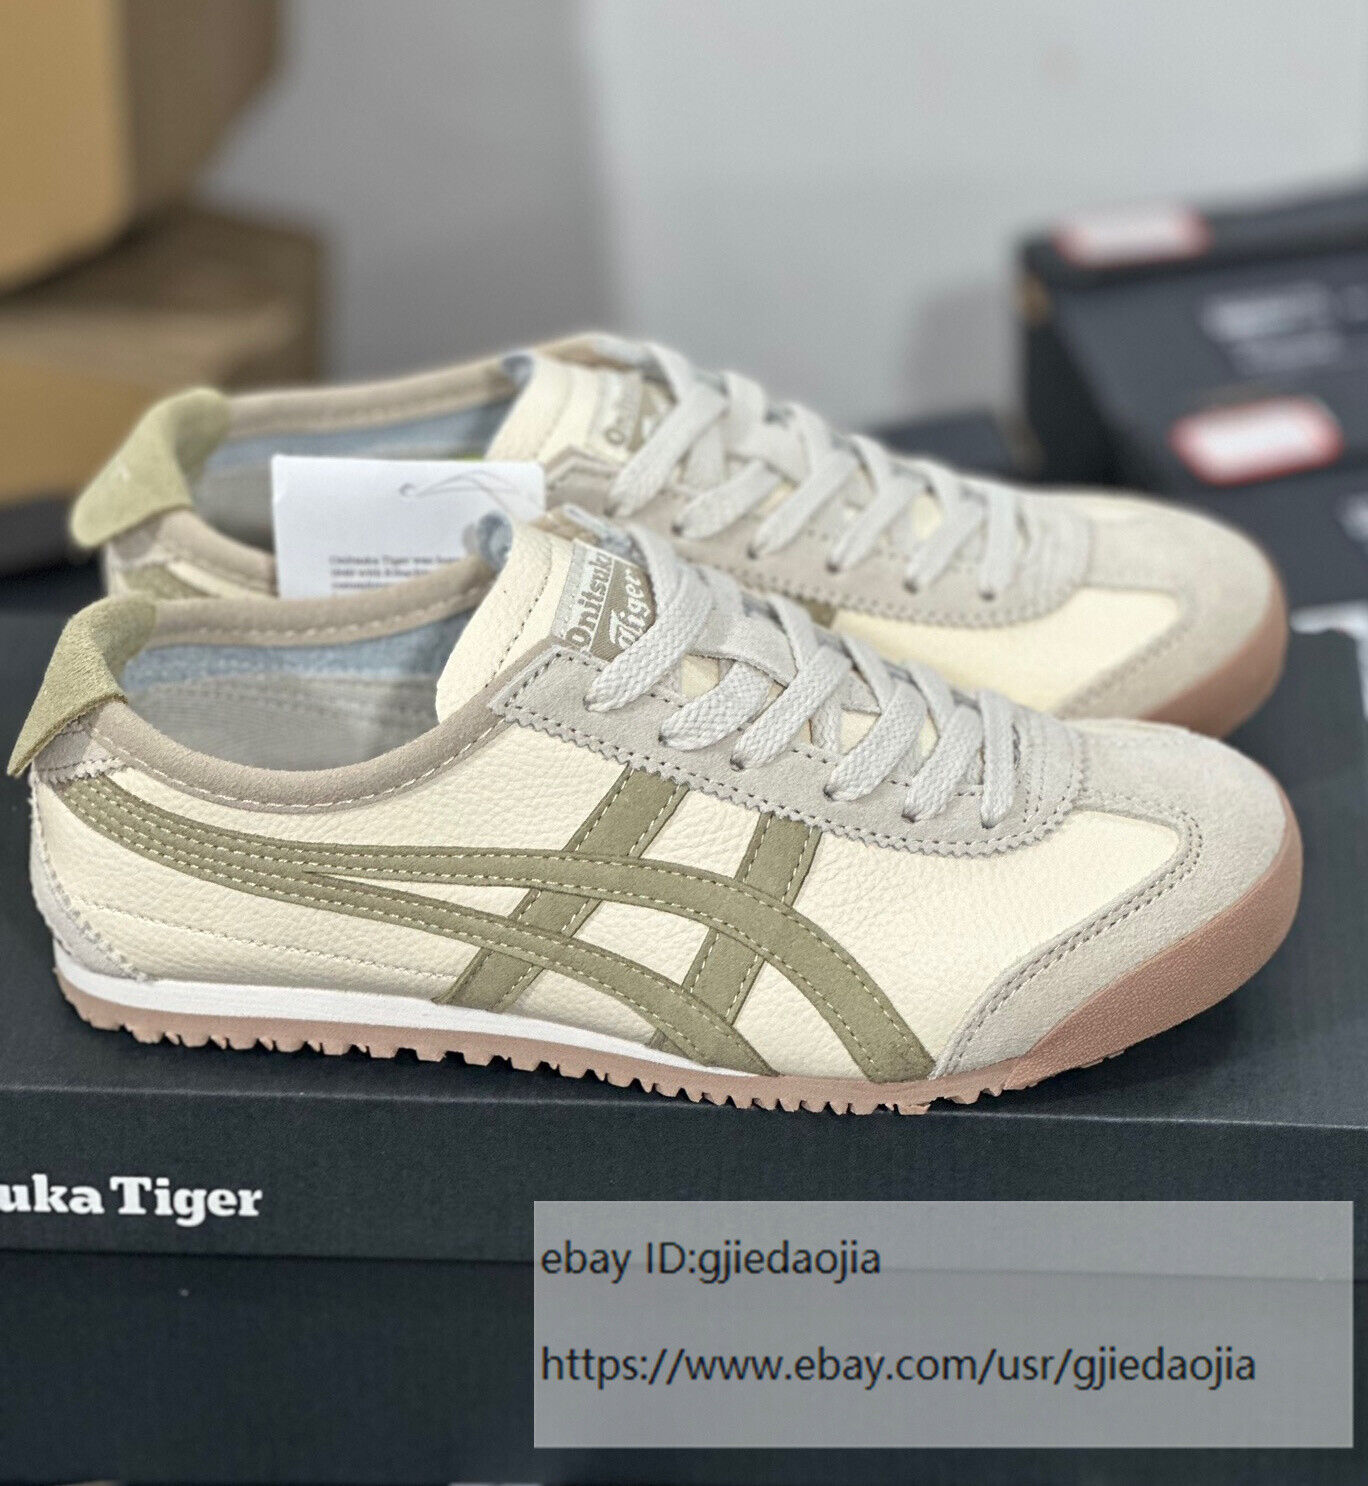 Onitsuka Tiger MEXICO 66 1183C076 101 Birch/Carbon Sneakers Shoes Unisex NEW